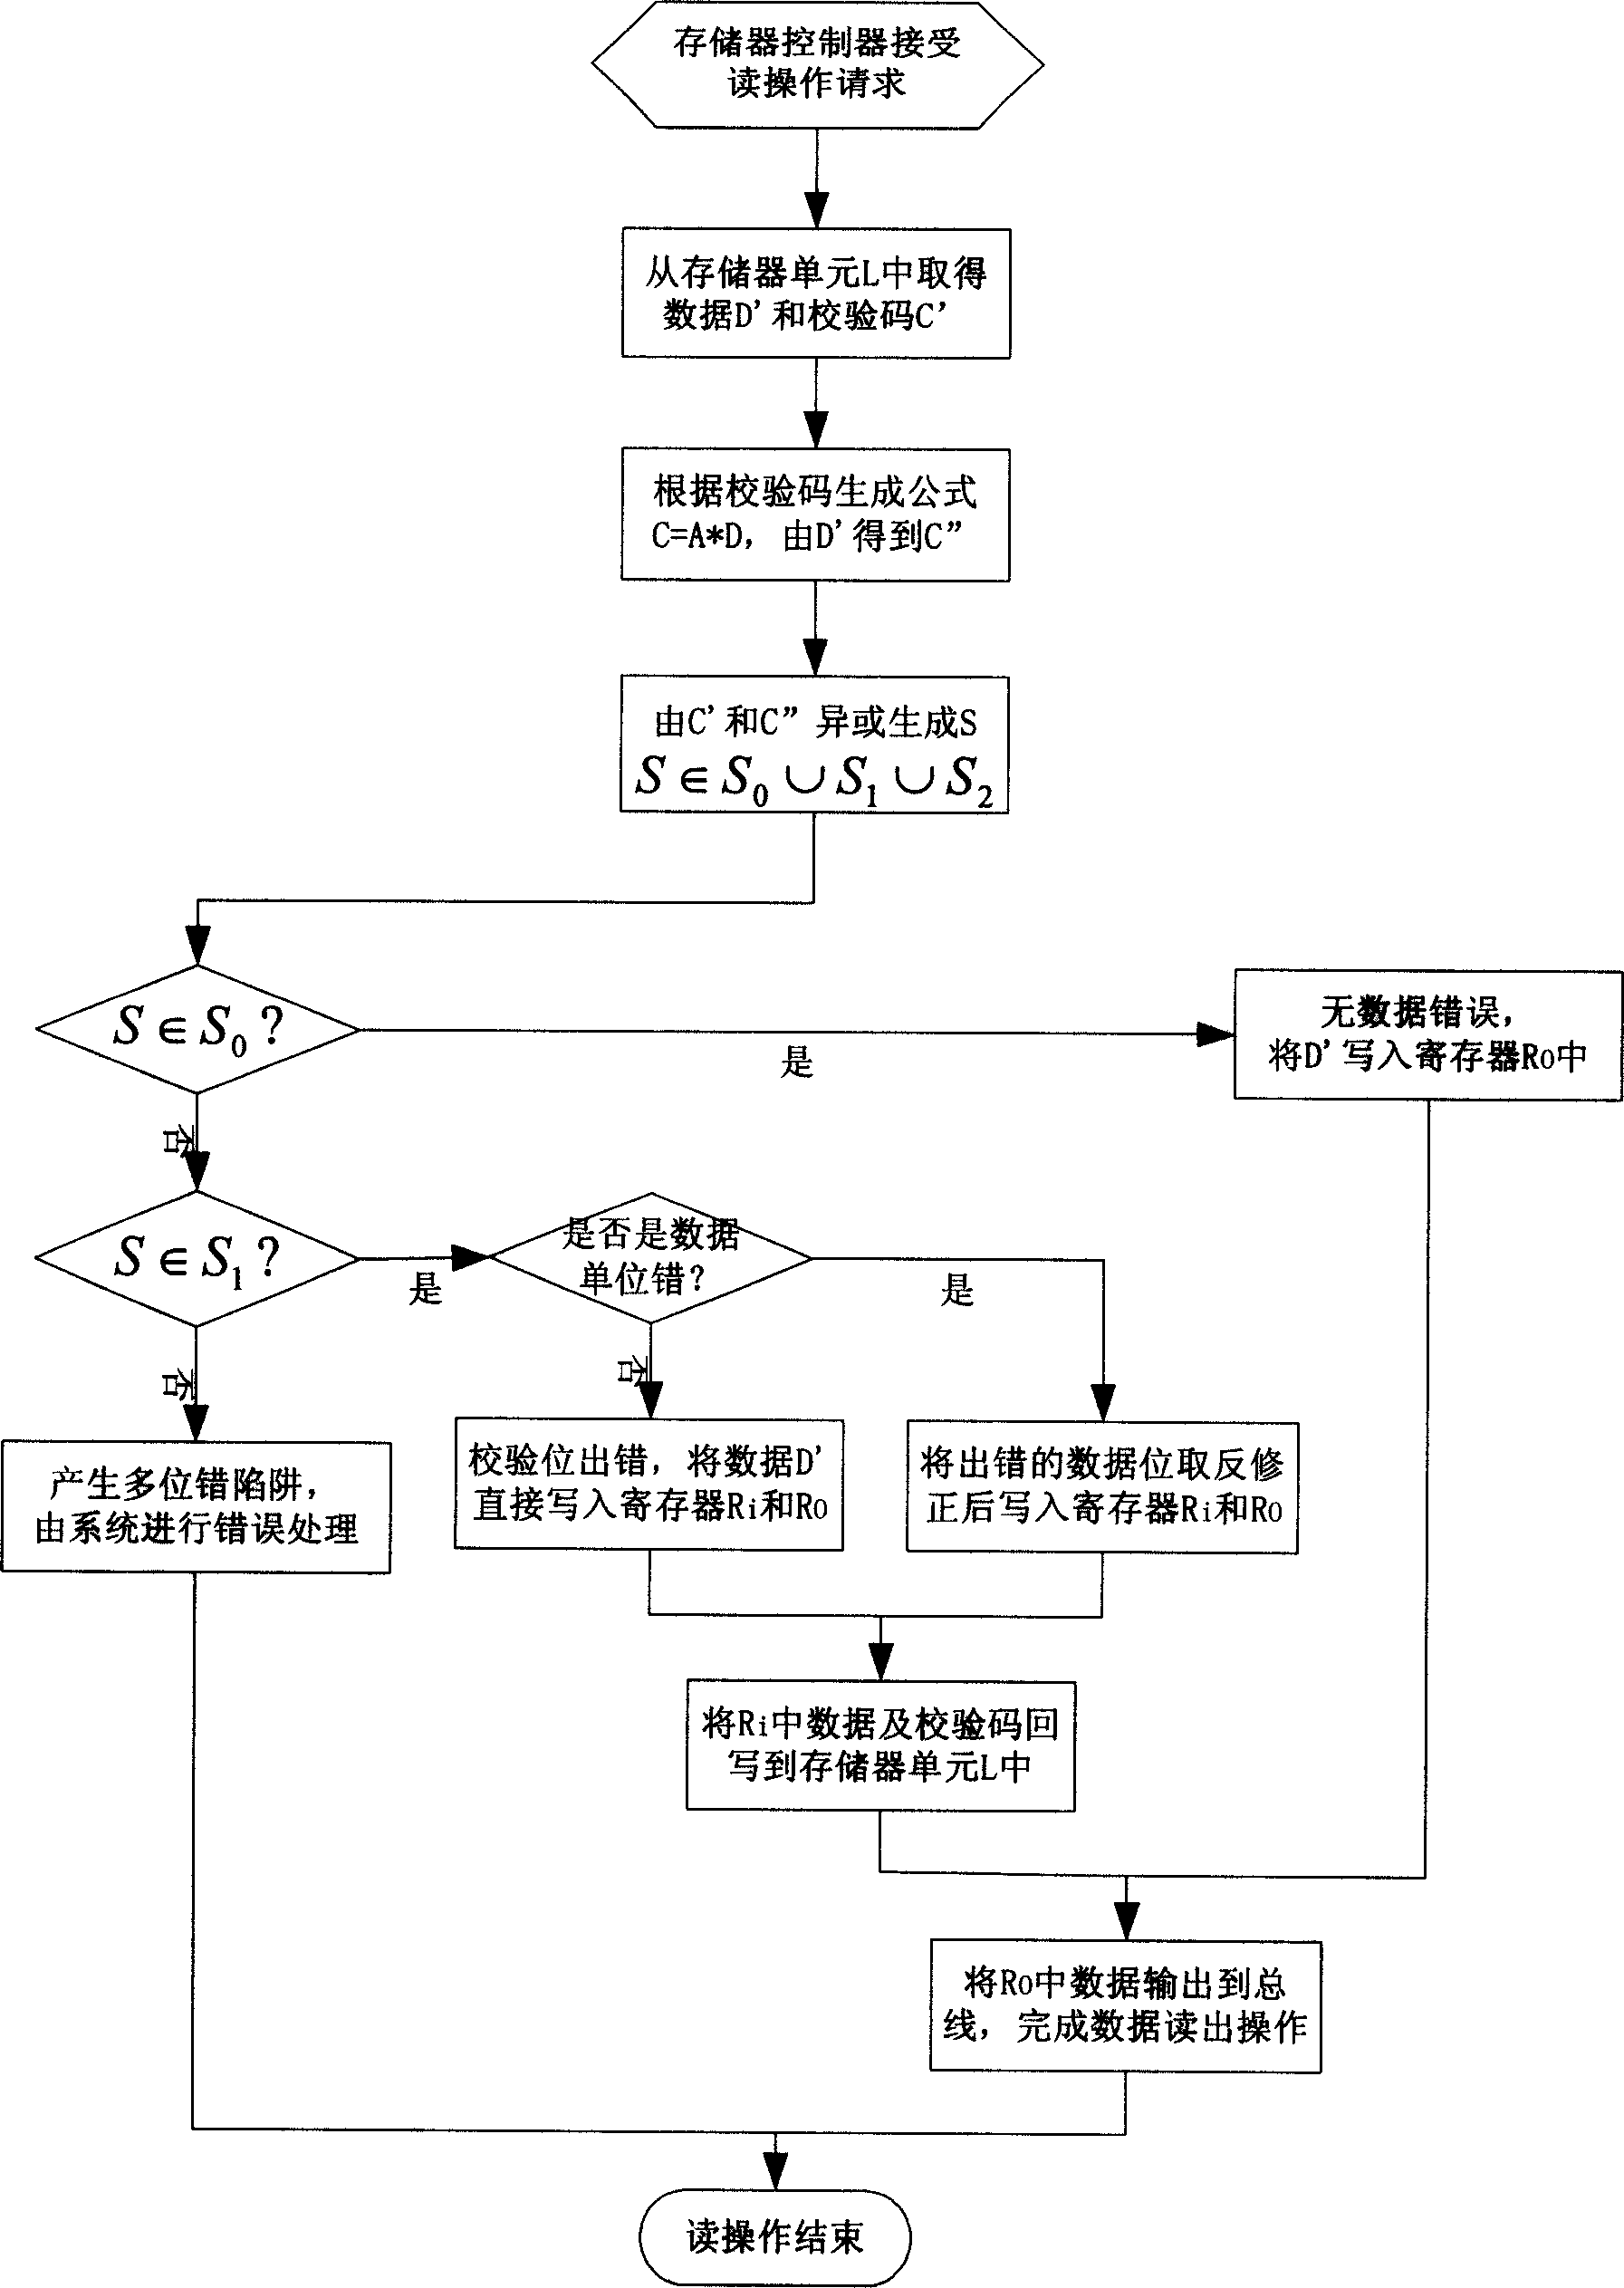 Primary particle inversion resistant memory error correction and detection and automatic write back method for spacial computer